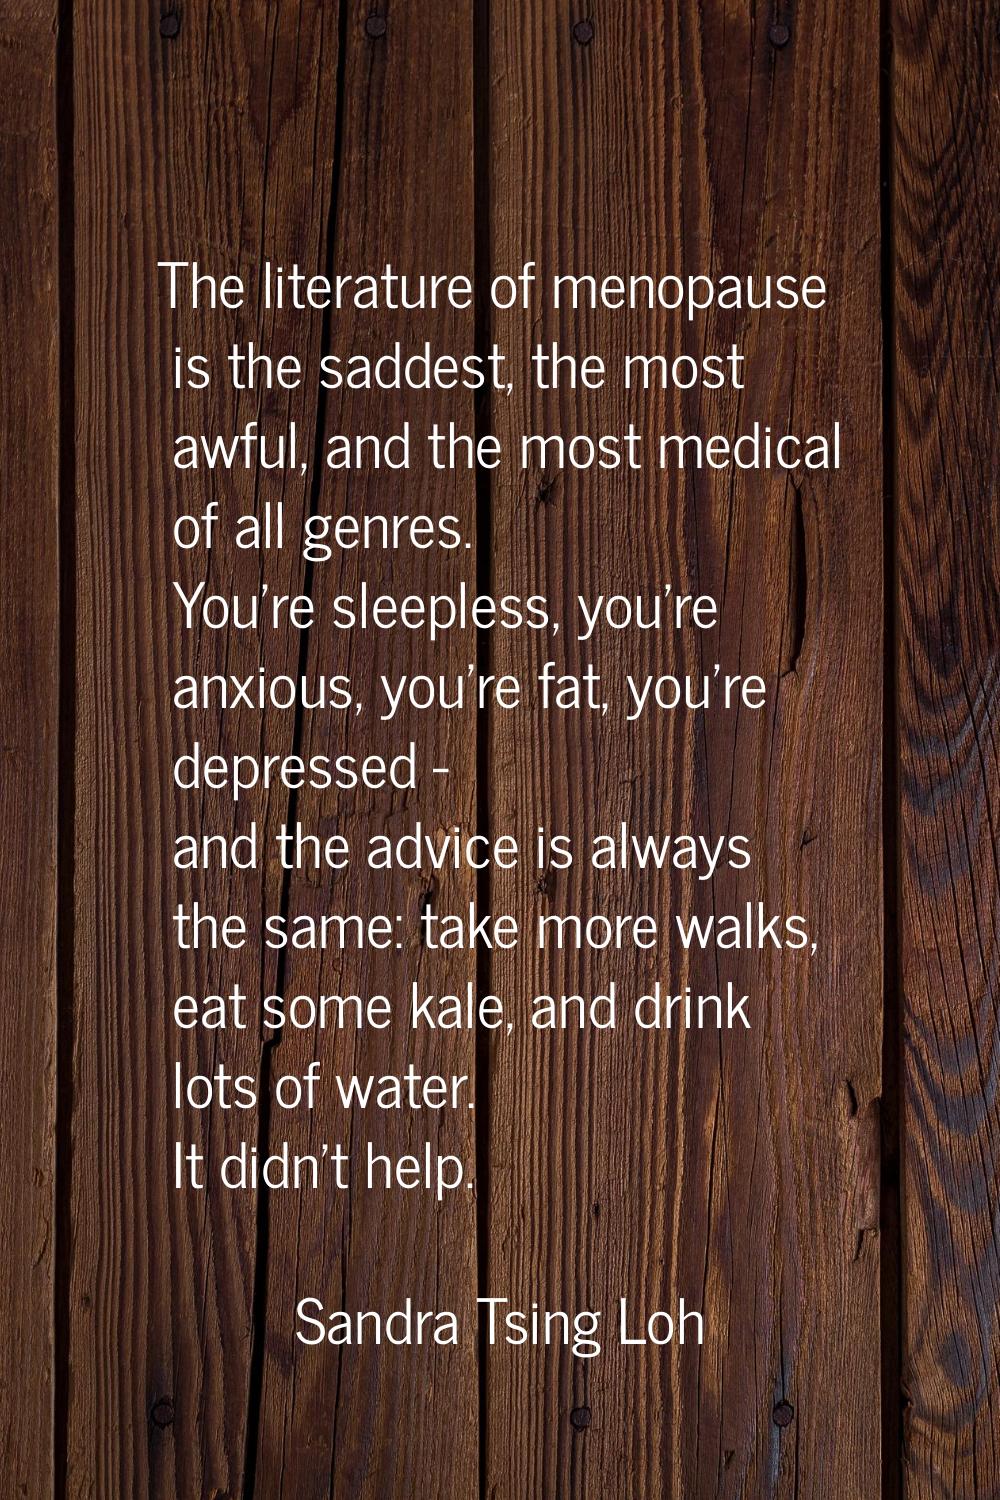 The literature of menopause is the saddest, the most awful, and the most medical of all genres. You